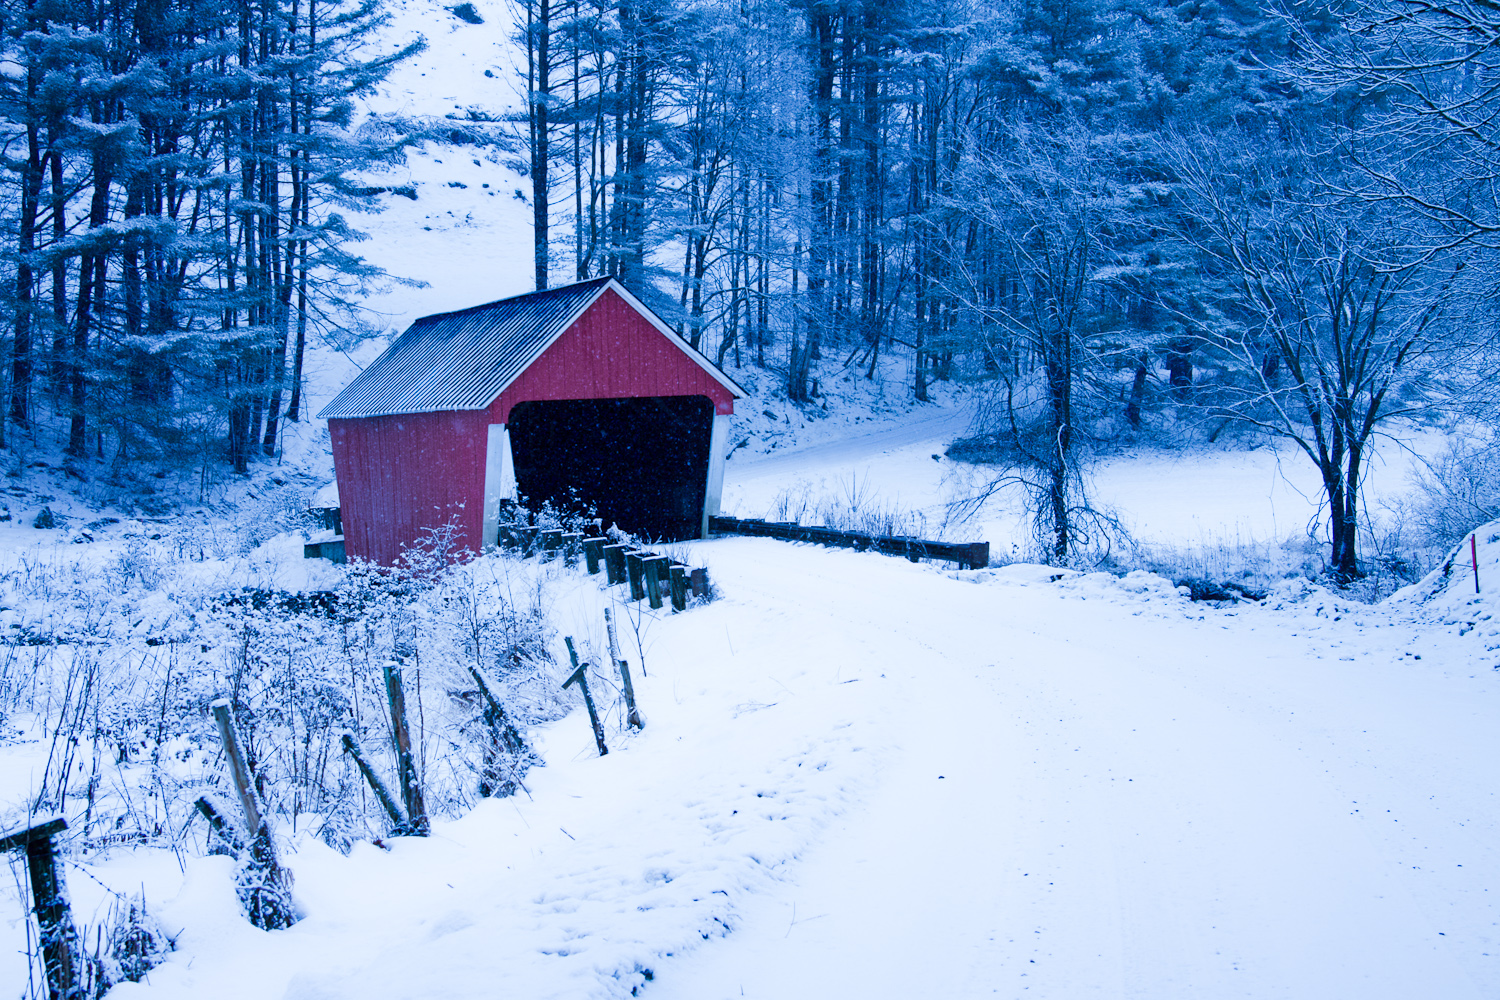 Vermont Covered Bridge In Snow (user submitted)